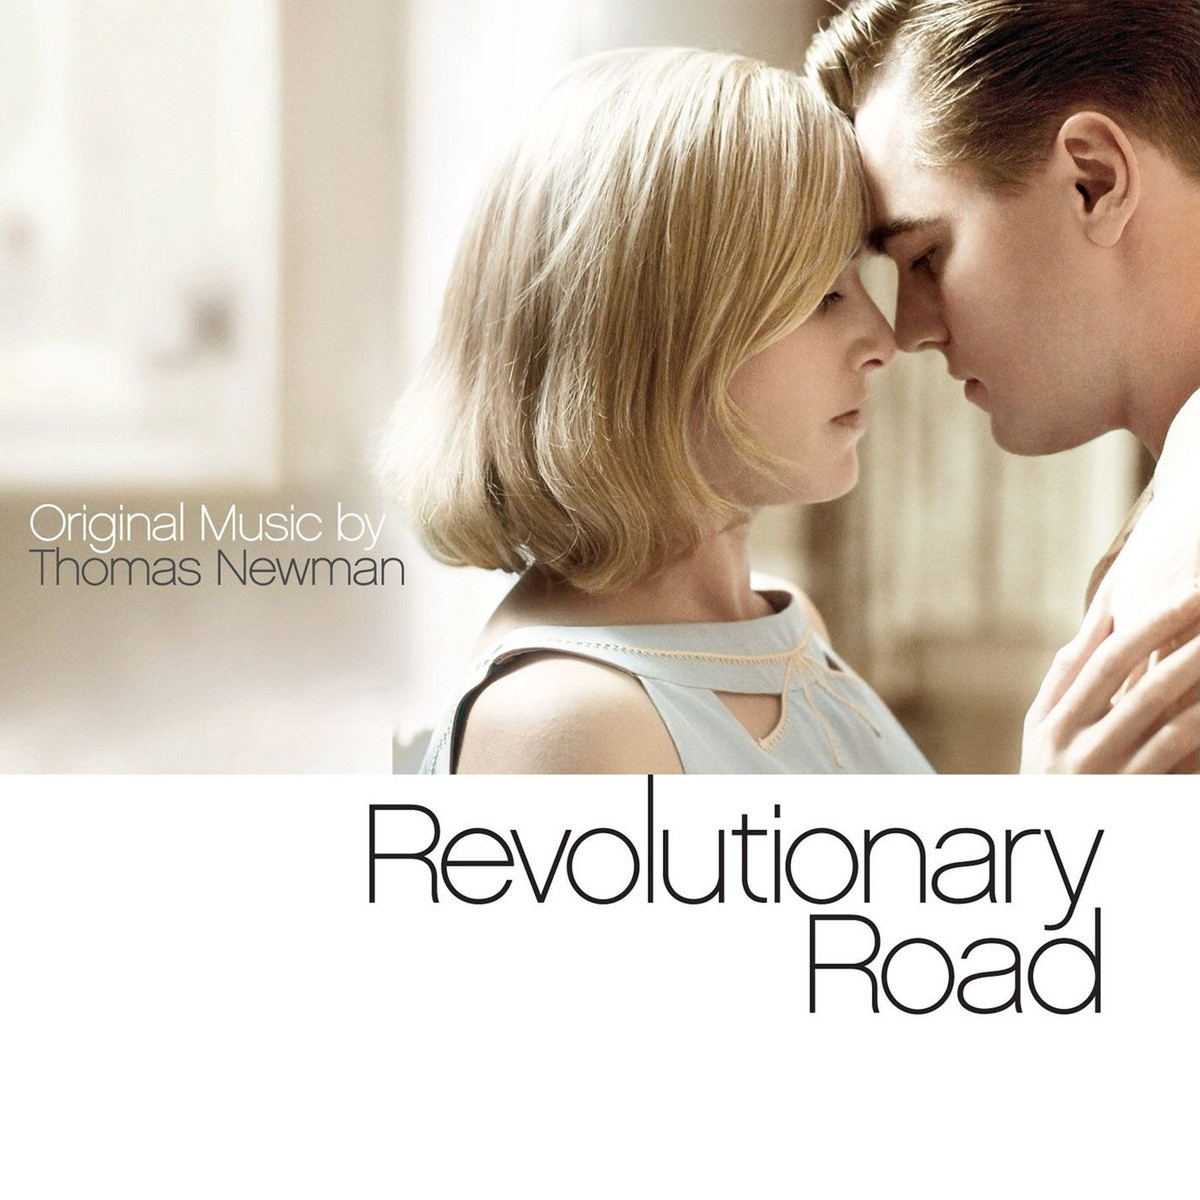 Revolutionary Road (End Title)